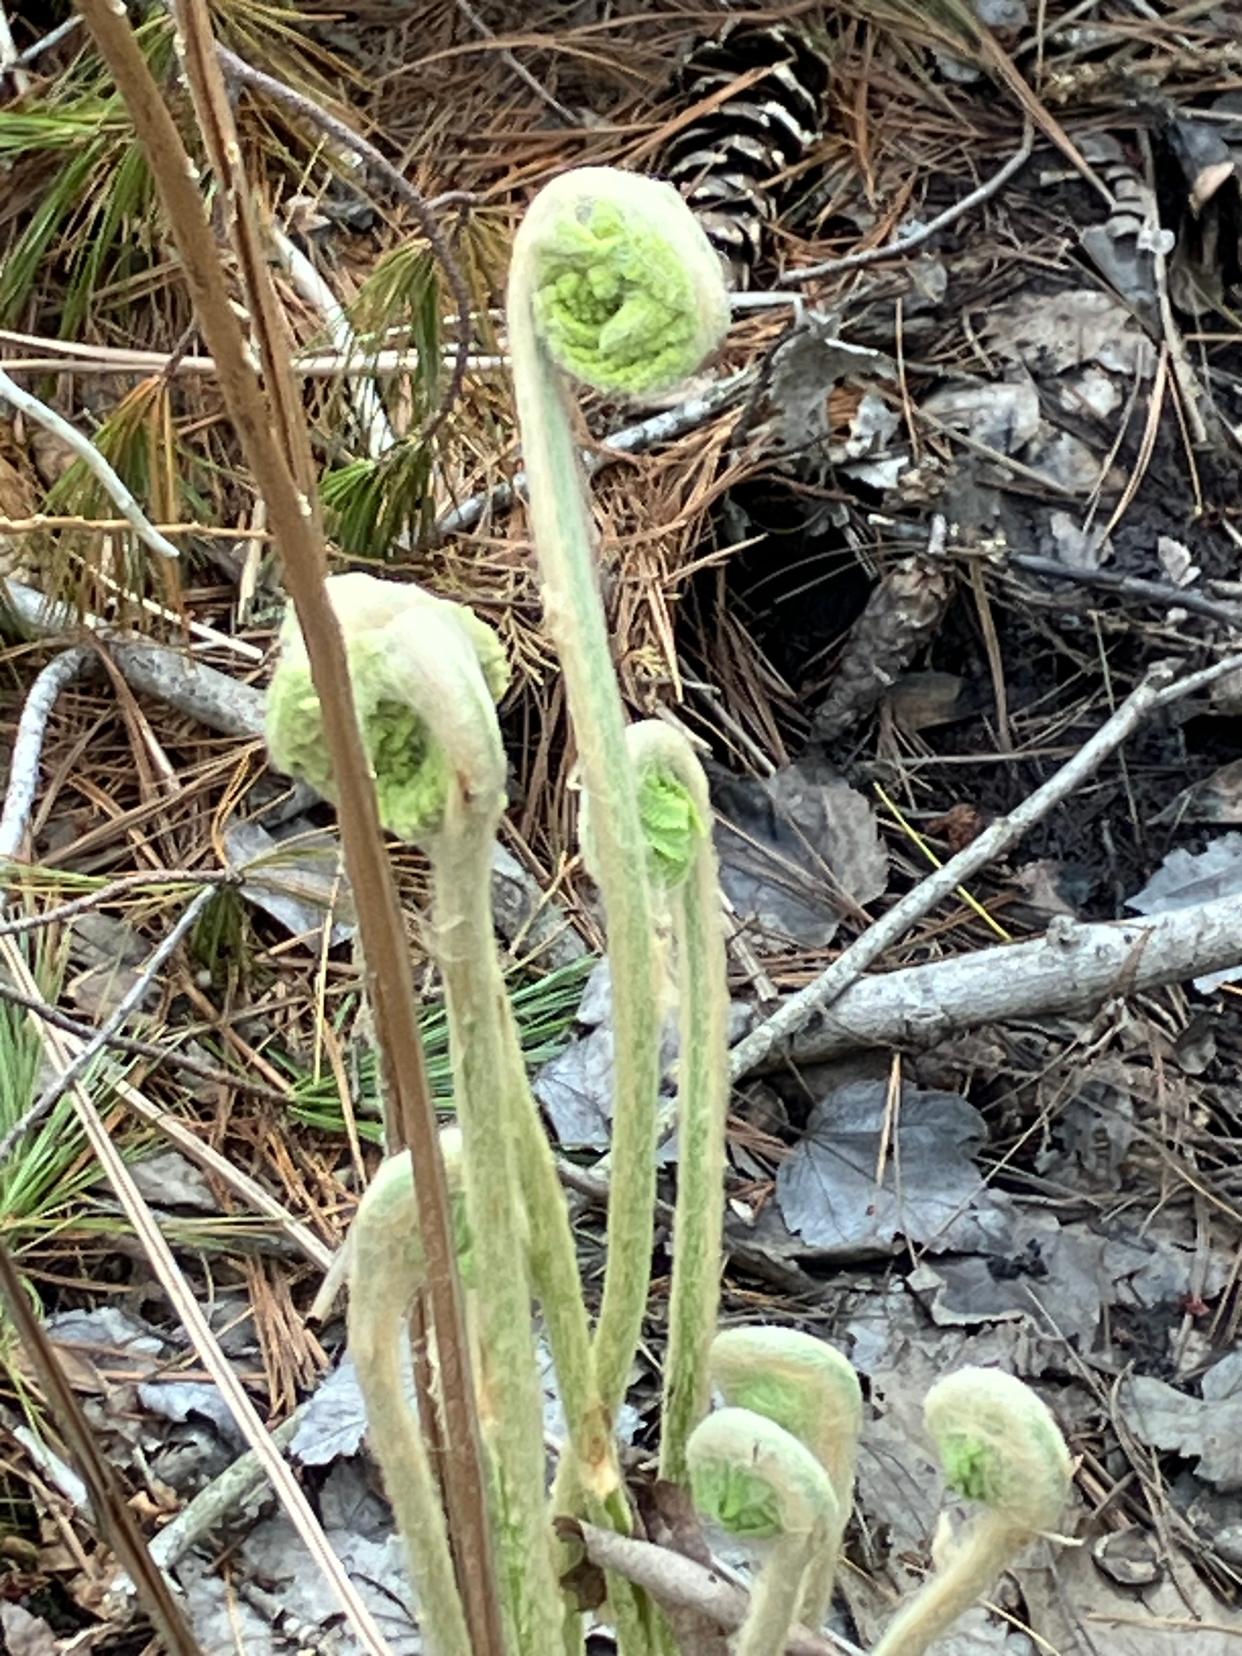 Patches of fiddlehead ferns grow in the wetlands on the western end of the preserve.